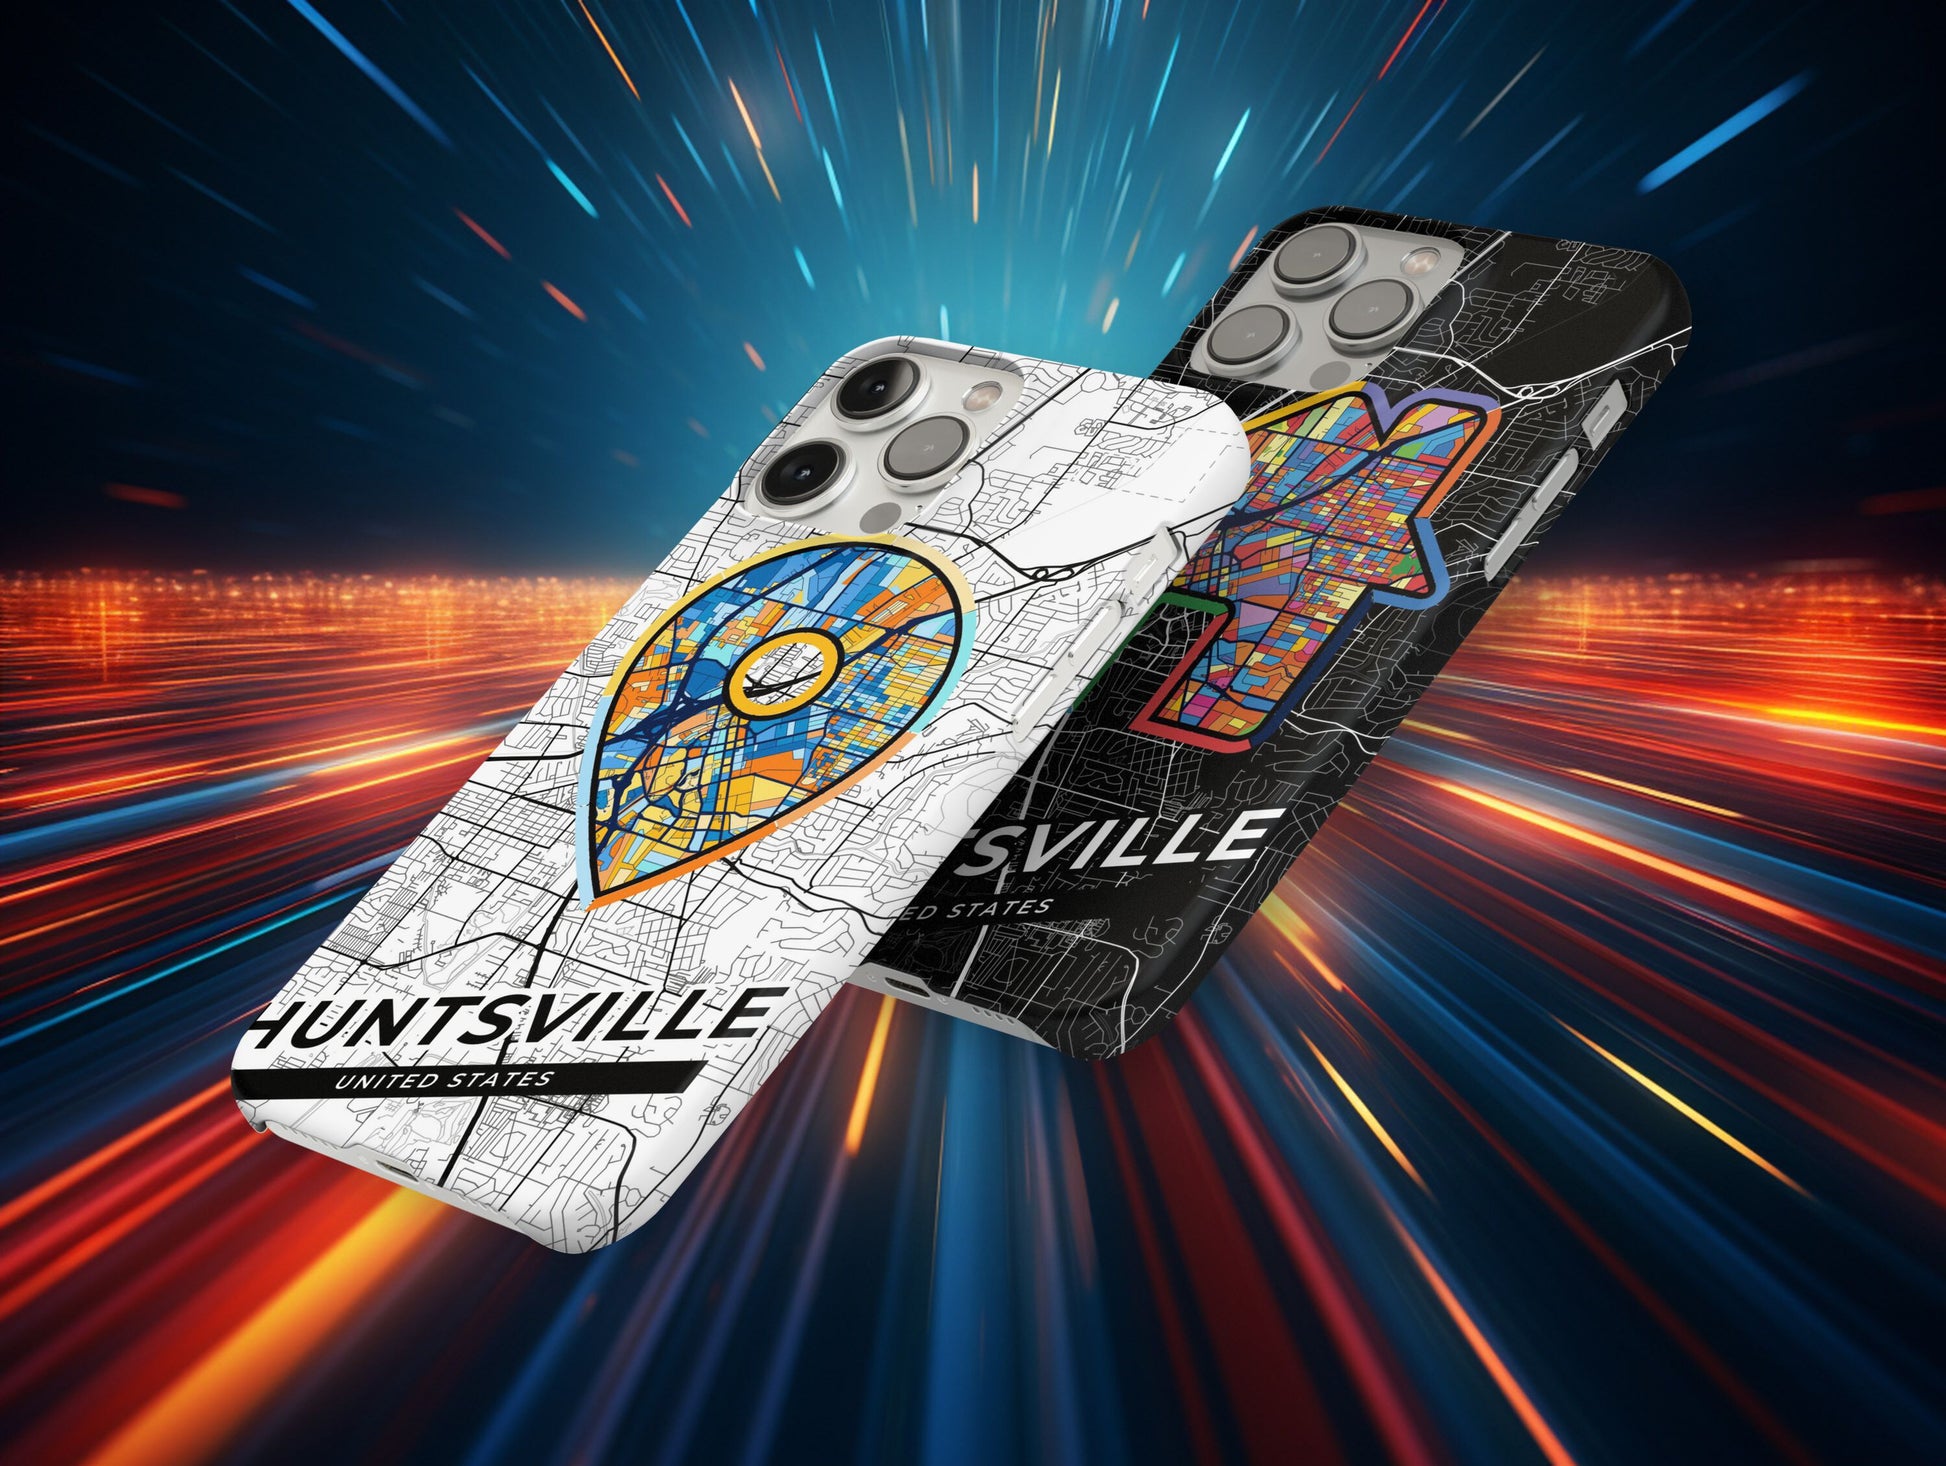 Huntsville Alabama slim phone case with colorful icon. Birthday, wedding or housewarming gift. Couple match cases.